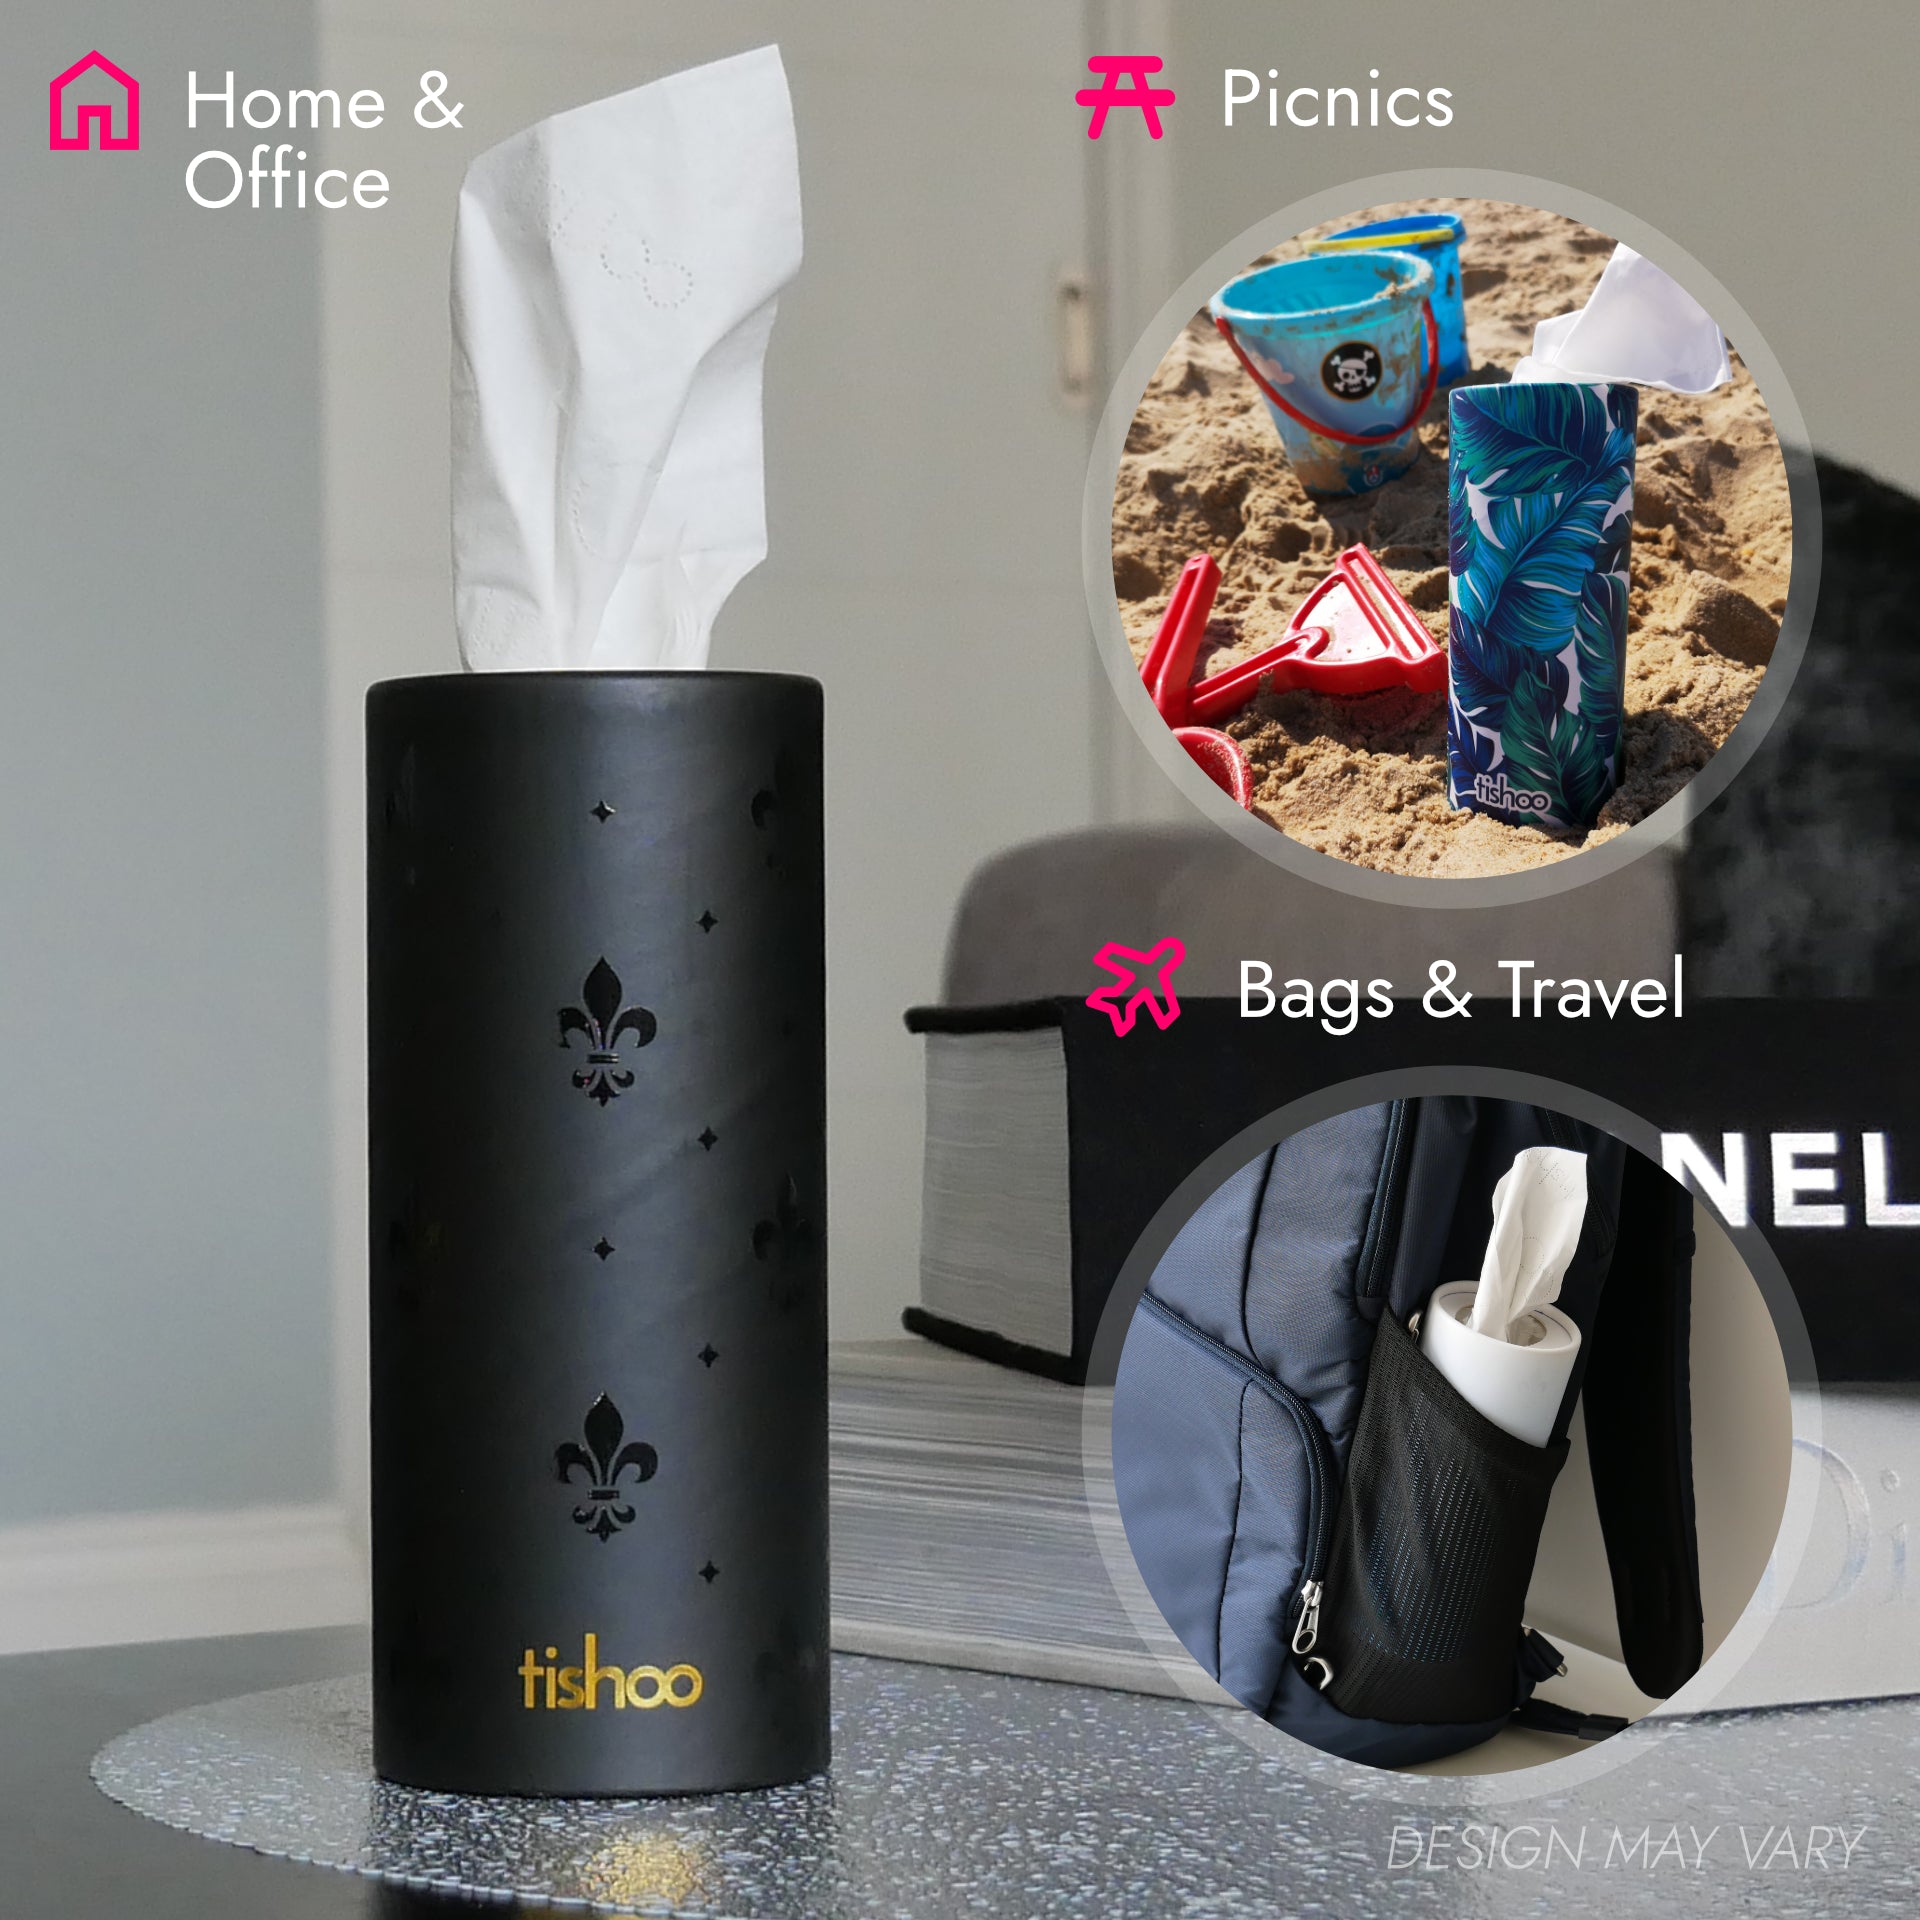 tishoo tube in home picnic and travel